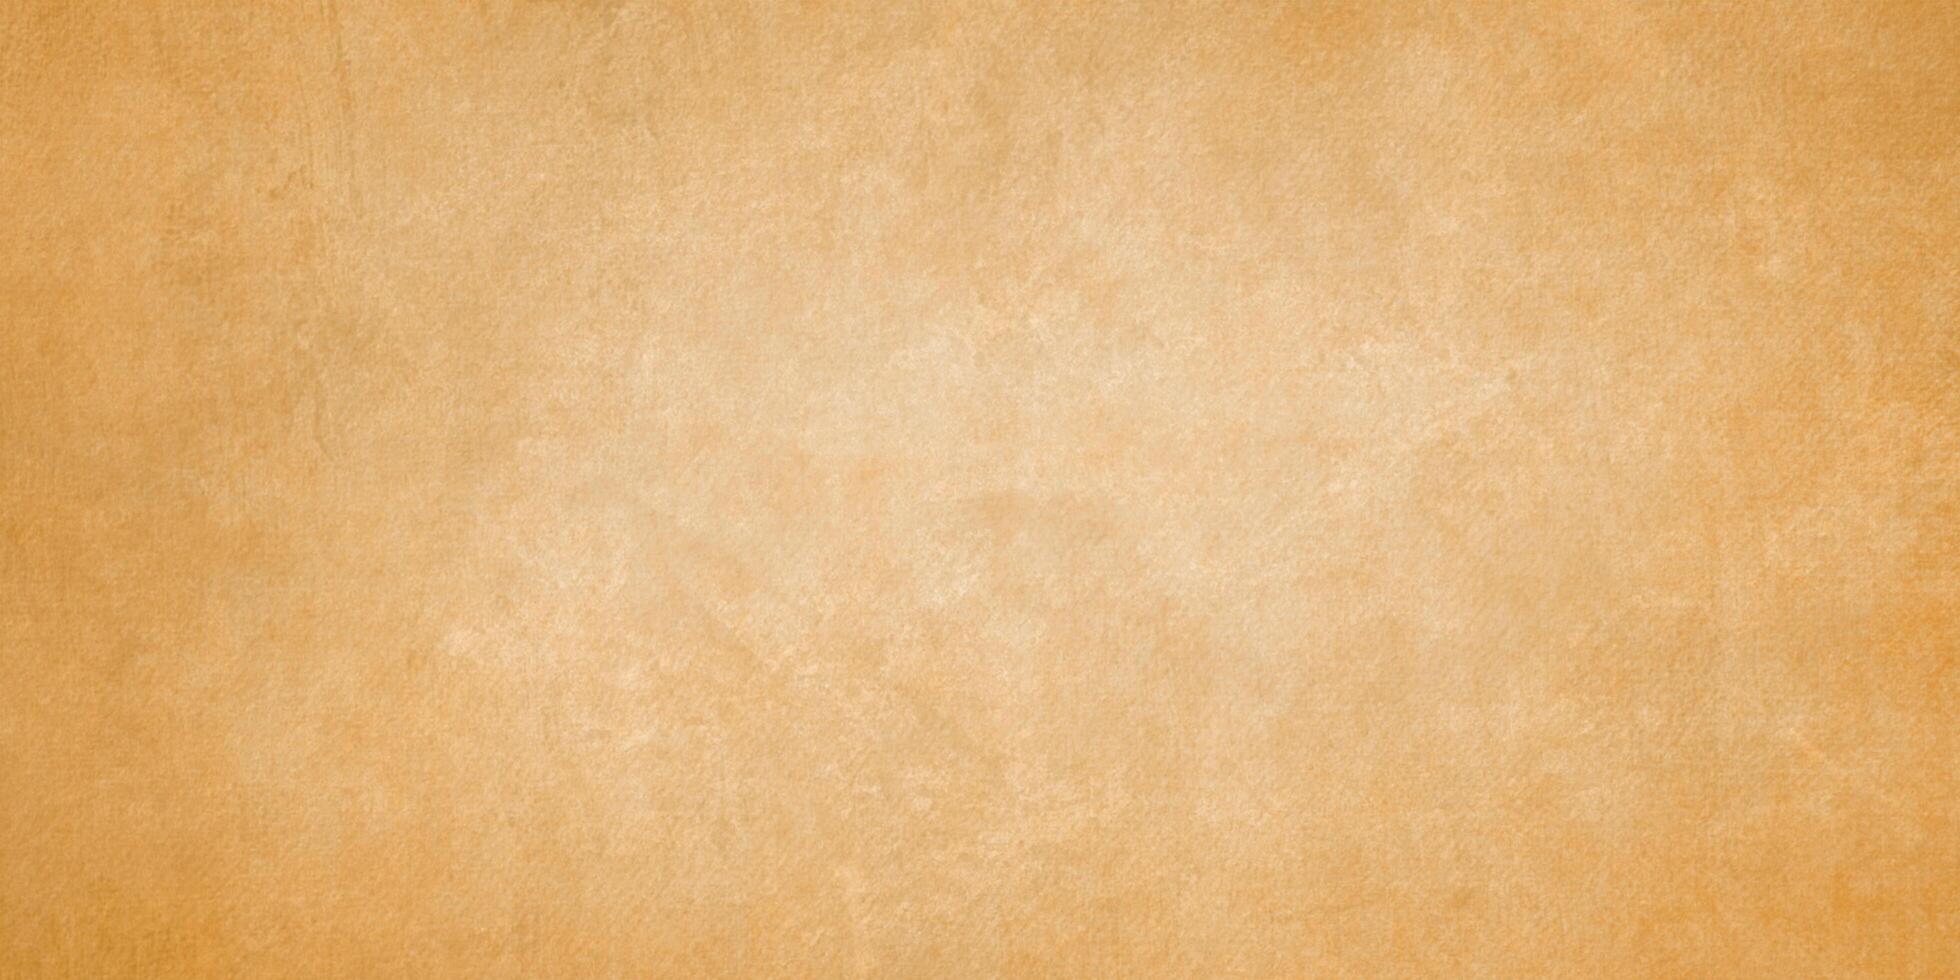 grunge and empty smooth Old stained paper background, grainy and spotted painted watercolor background on paper texture. photo